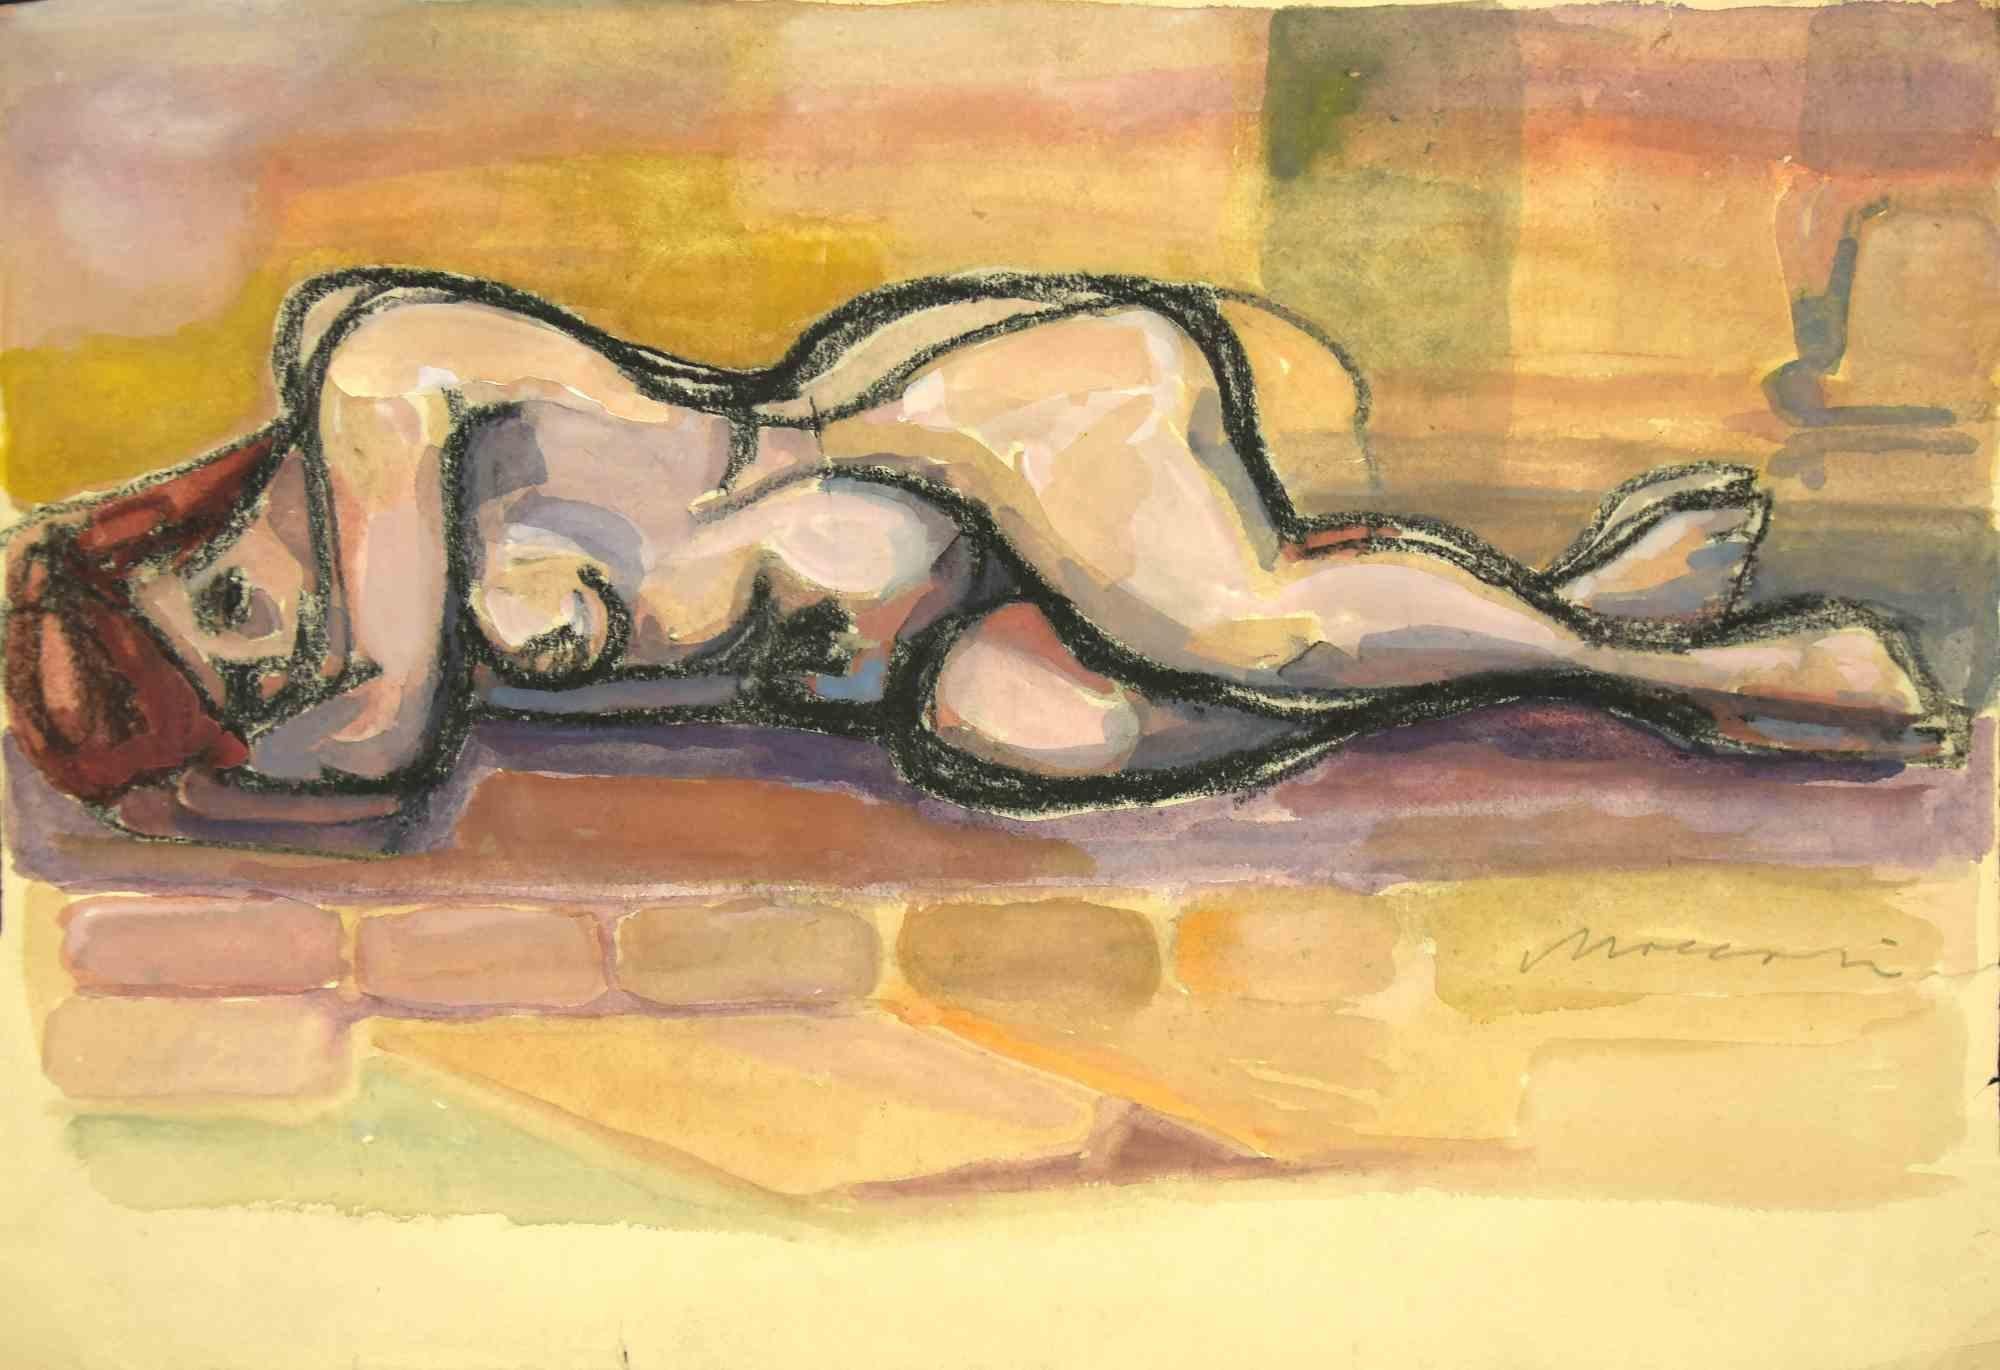 Modern Nude Drawings and Watercolors